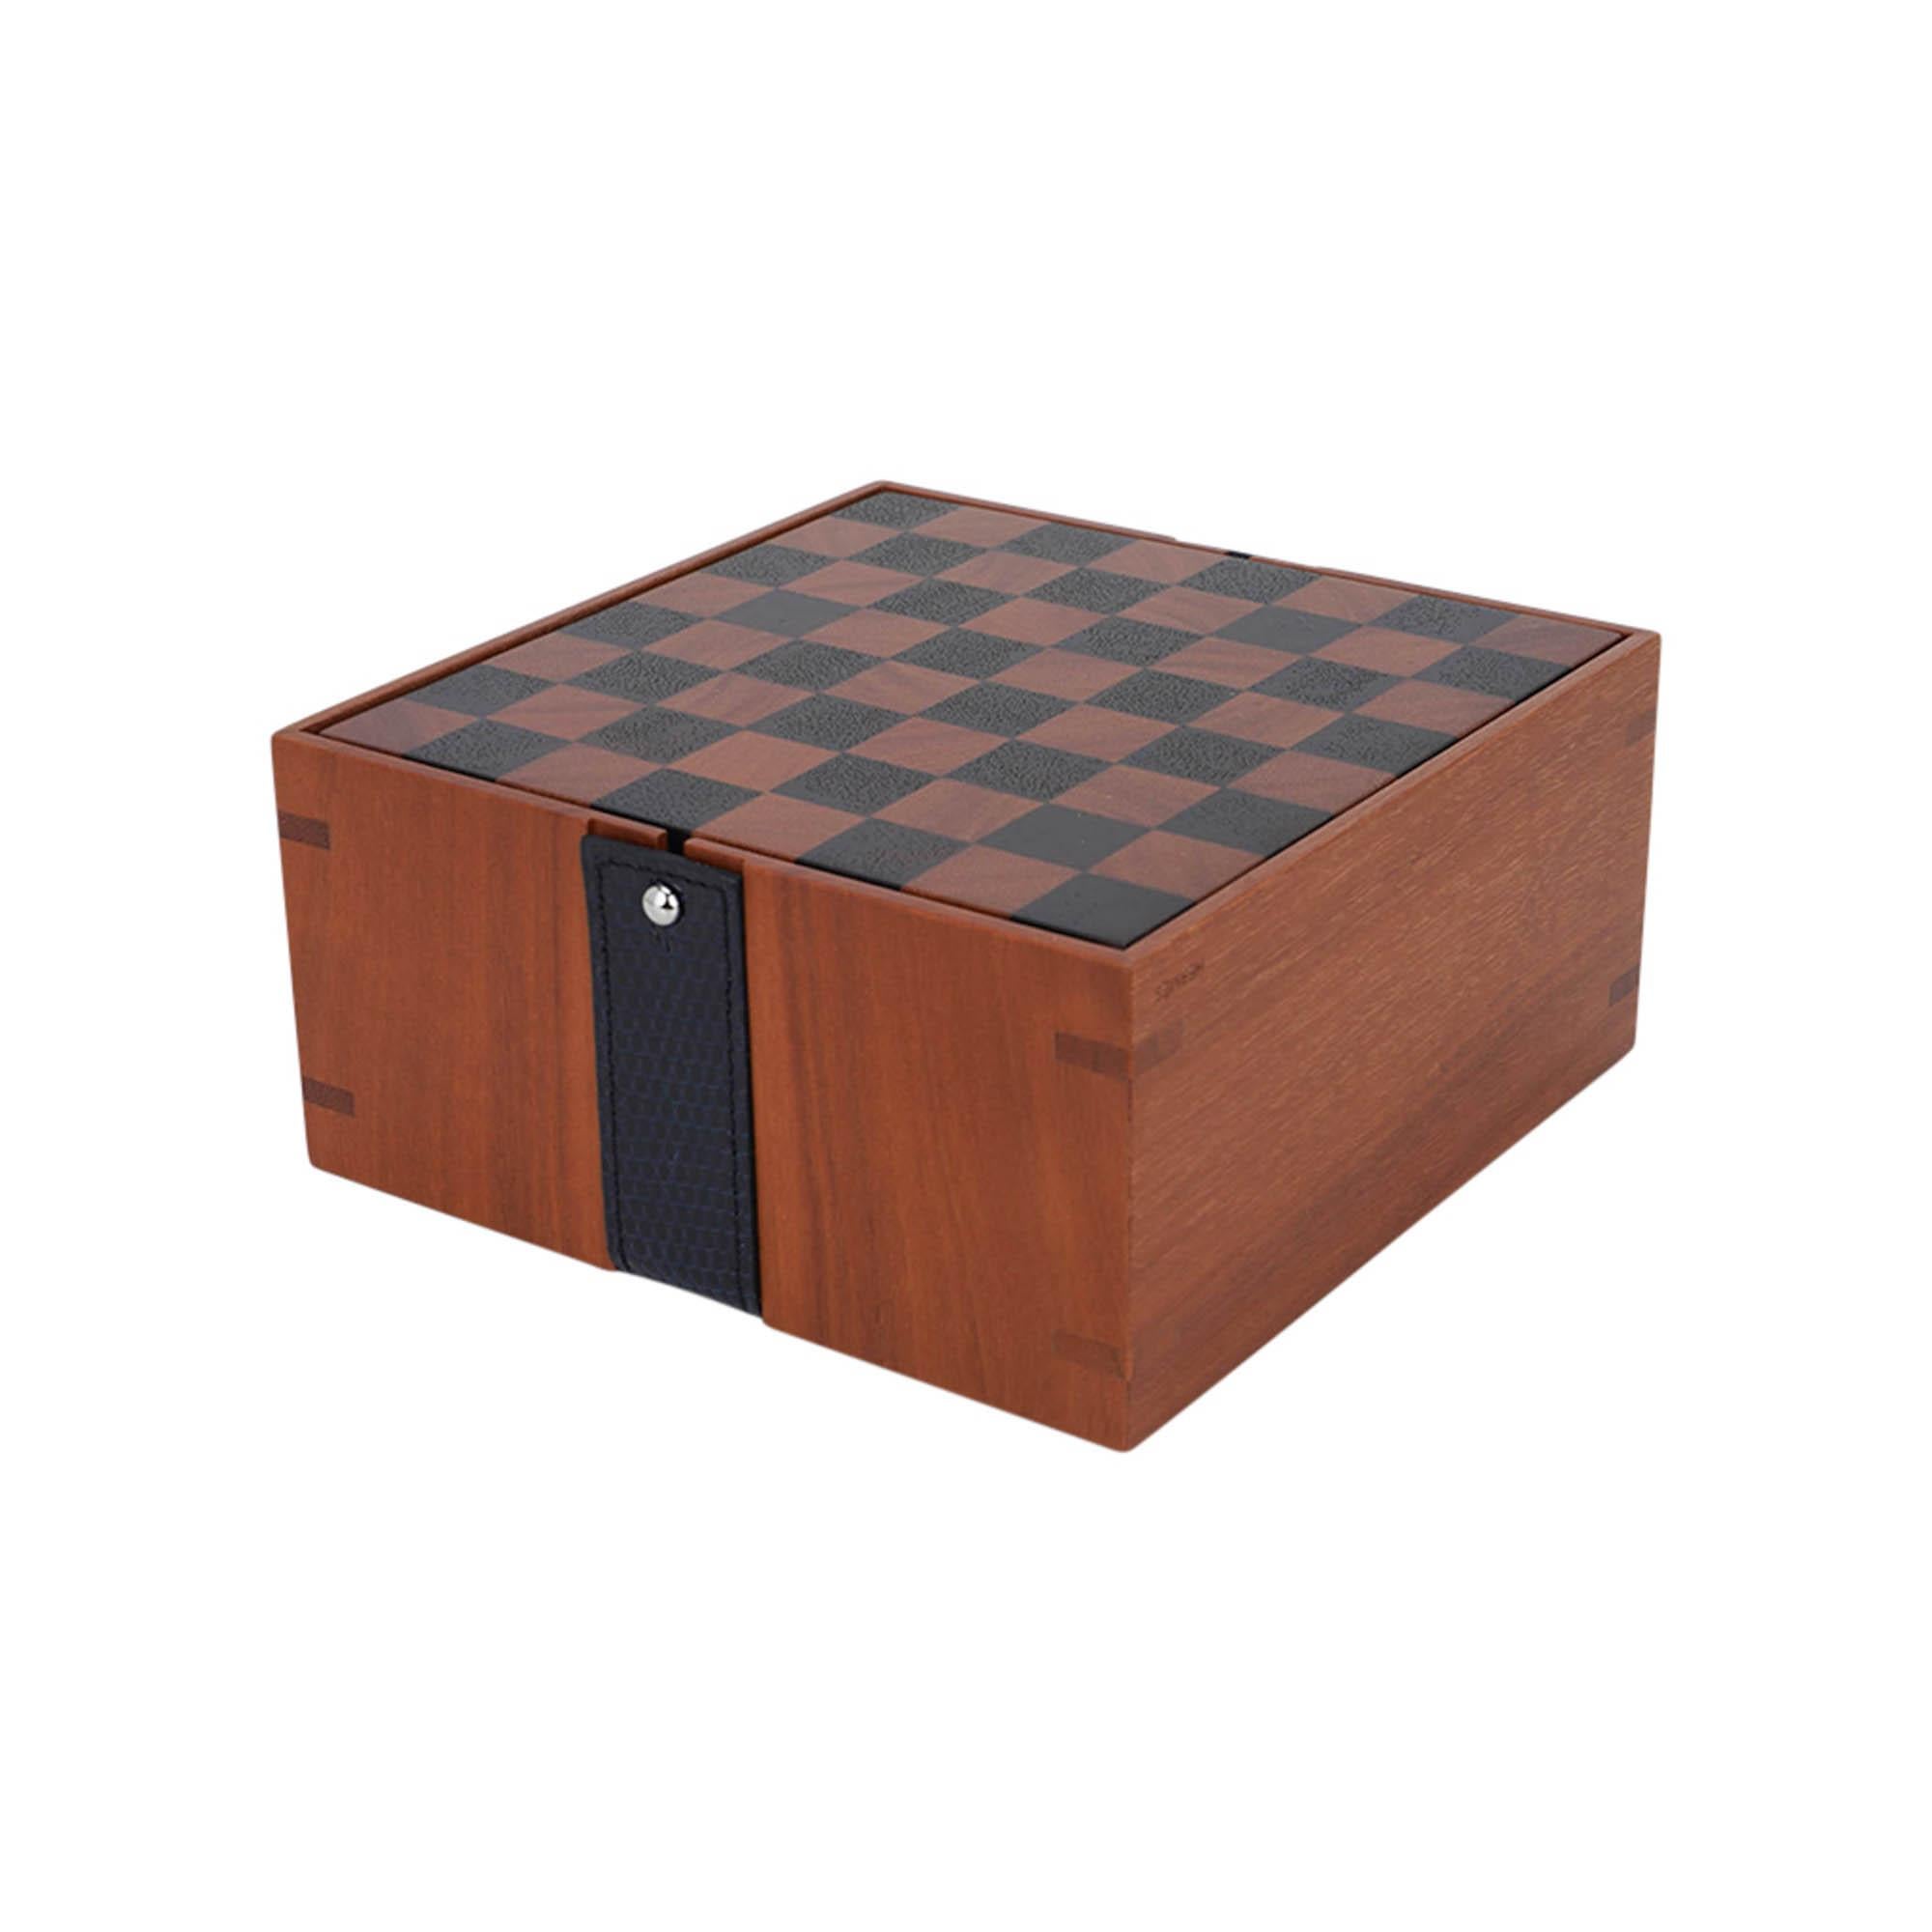 Mightychic offers an Hermes Mini Samarcande Chess Set  with a dash of luxury!
Featured in sapodilla wood and solid cassia wood.
A mini Chess game with magnetic pieces.
Continuing the Equestrian motif, the box comes with a  removeable Bleu Indigo